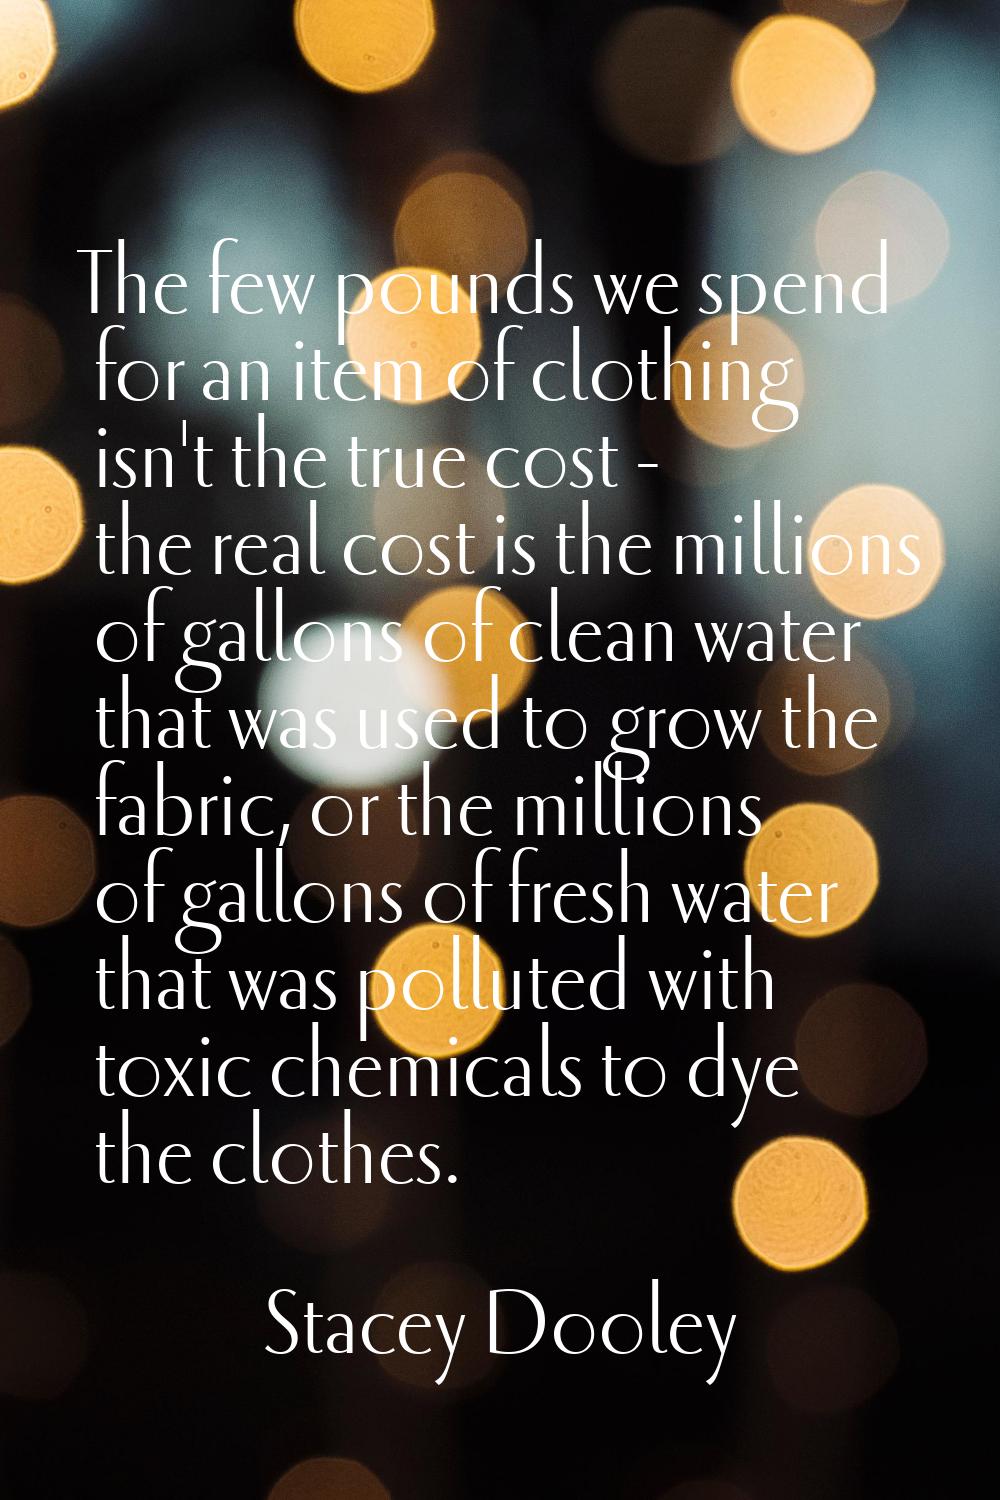 The few pounds we spend for an item of clothing isn't the true cost - the real cost is the millions